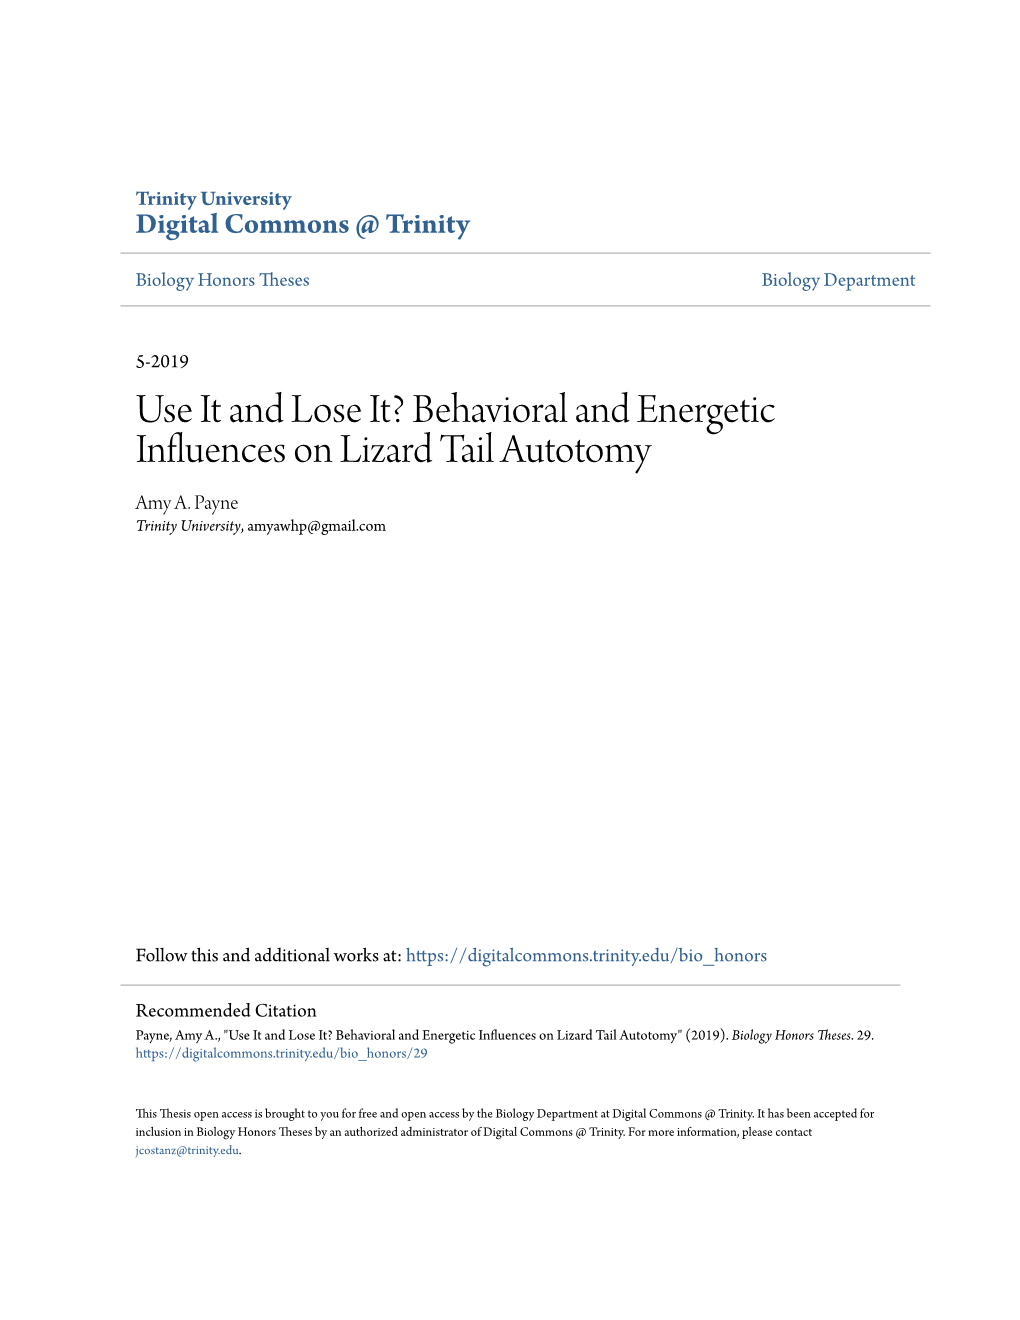 Behavioral and Energetic Influences on Lizard Tail Autotomy Amy A